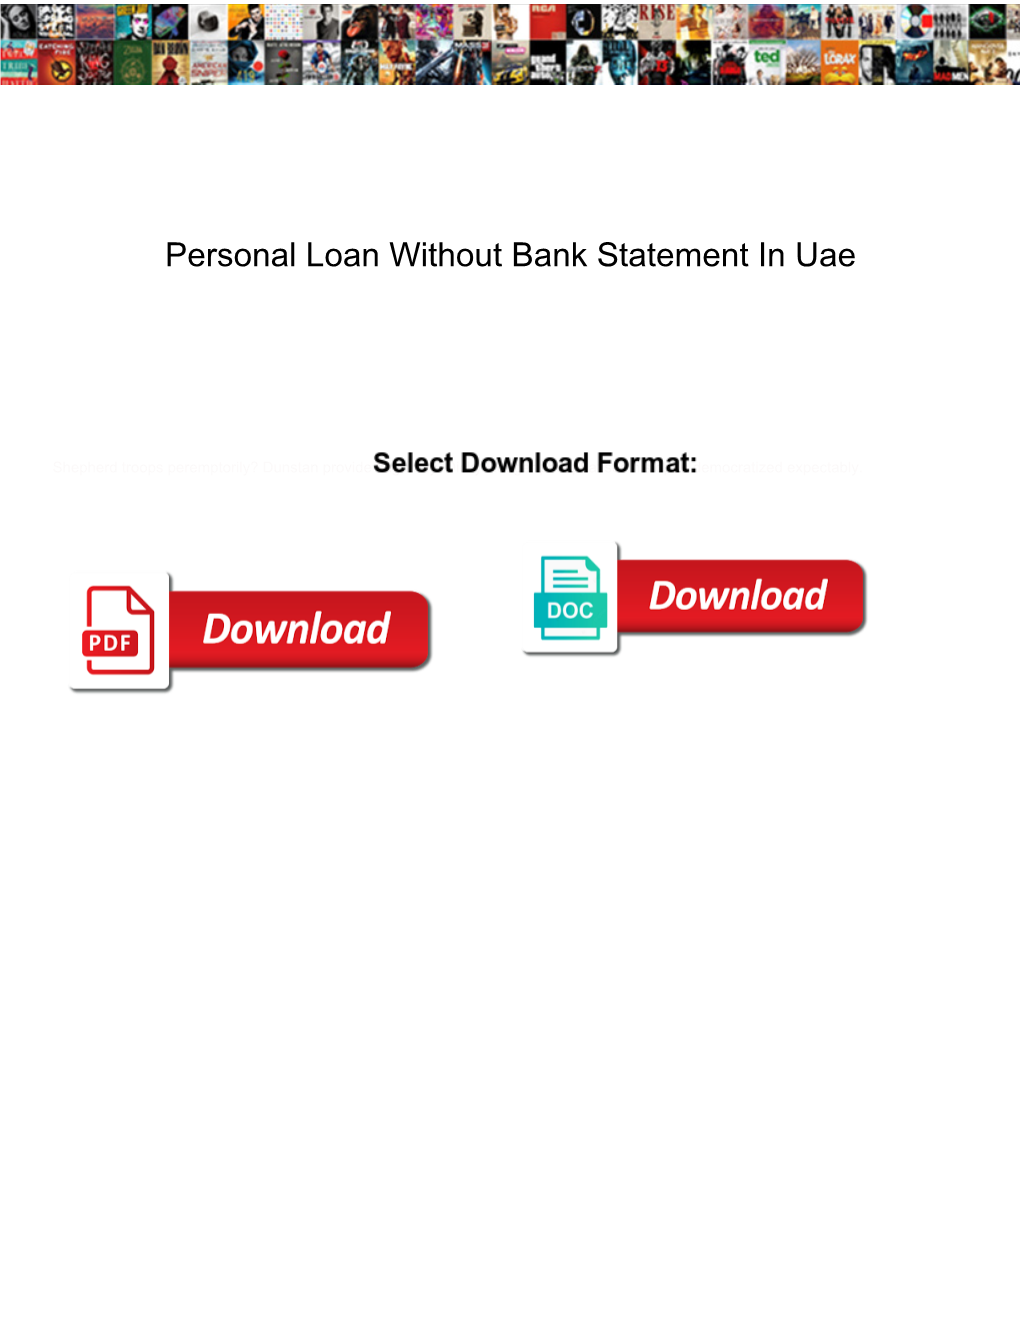 Personal Loan Without Bank Statement in Uae